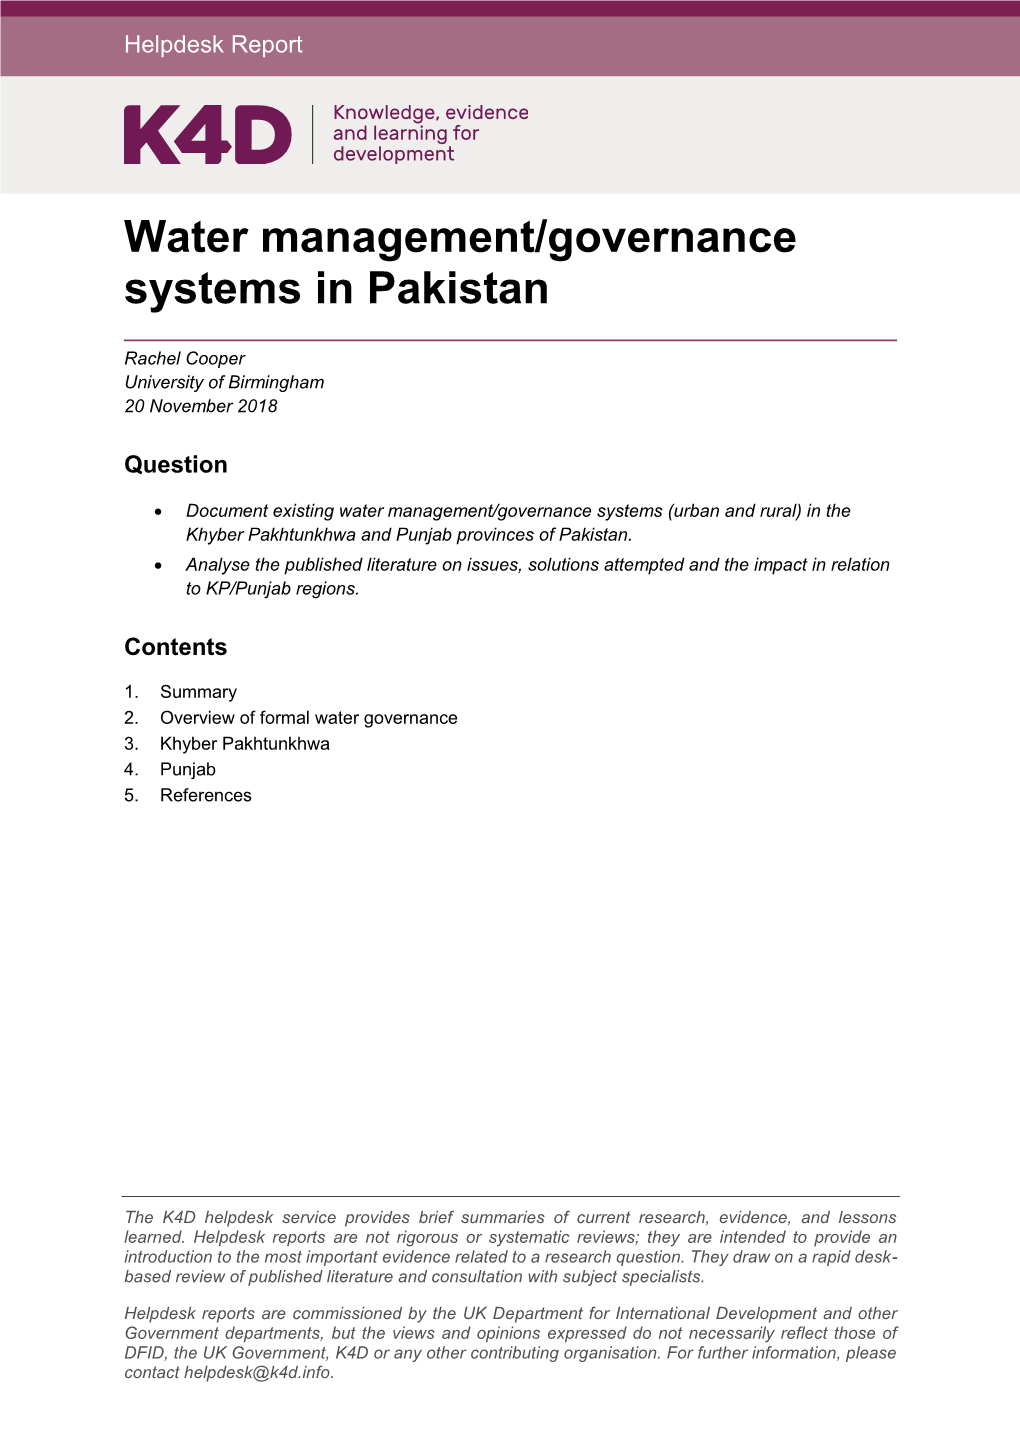 Water Management/Governance Systems in Pakistan